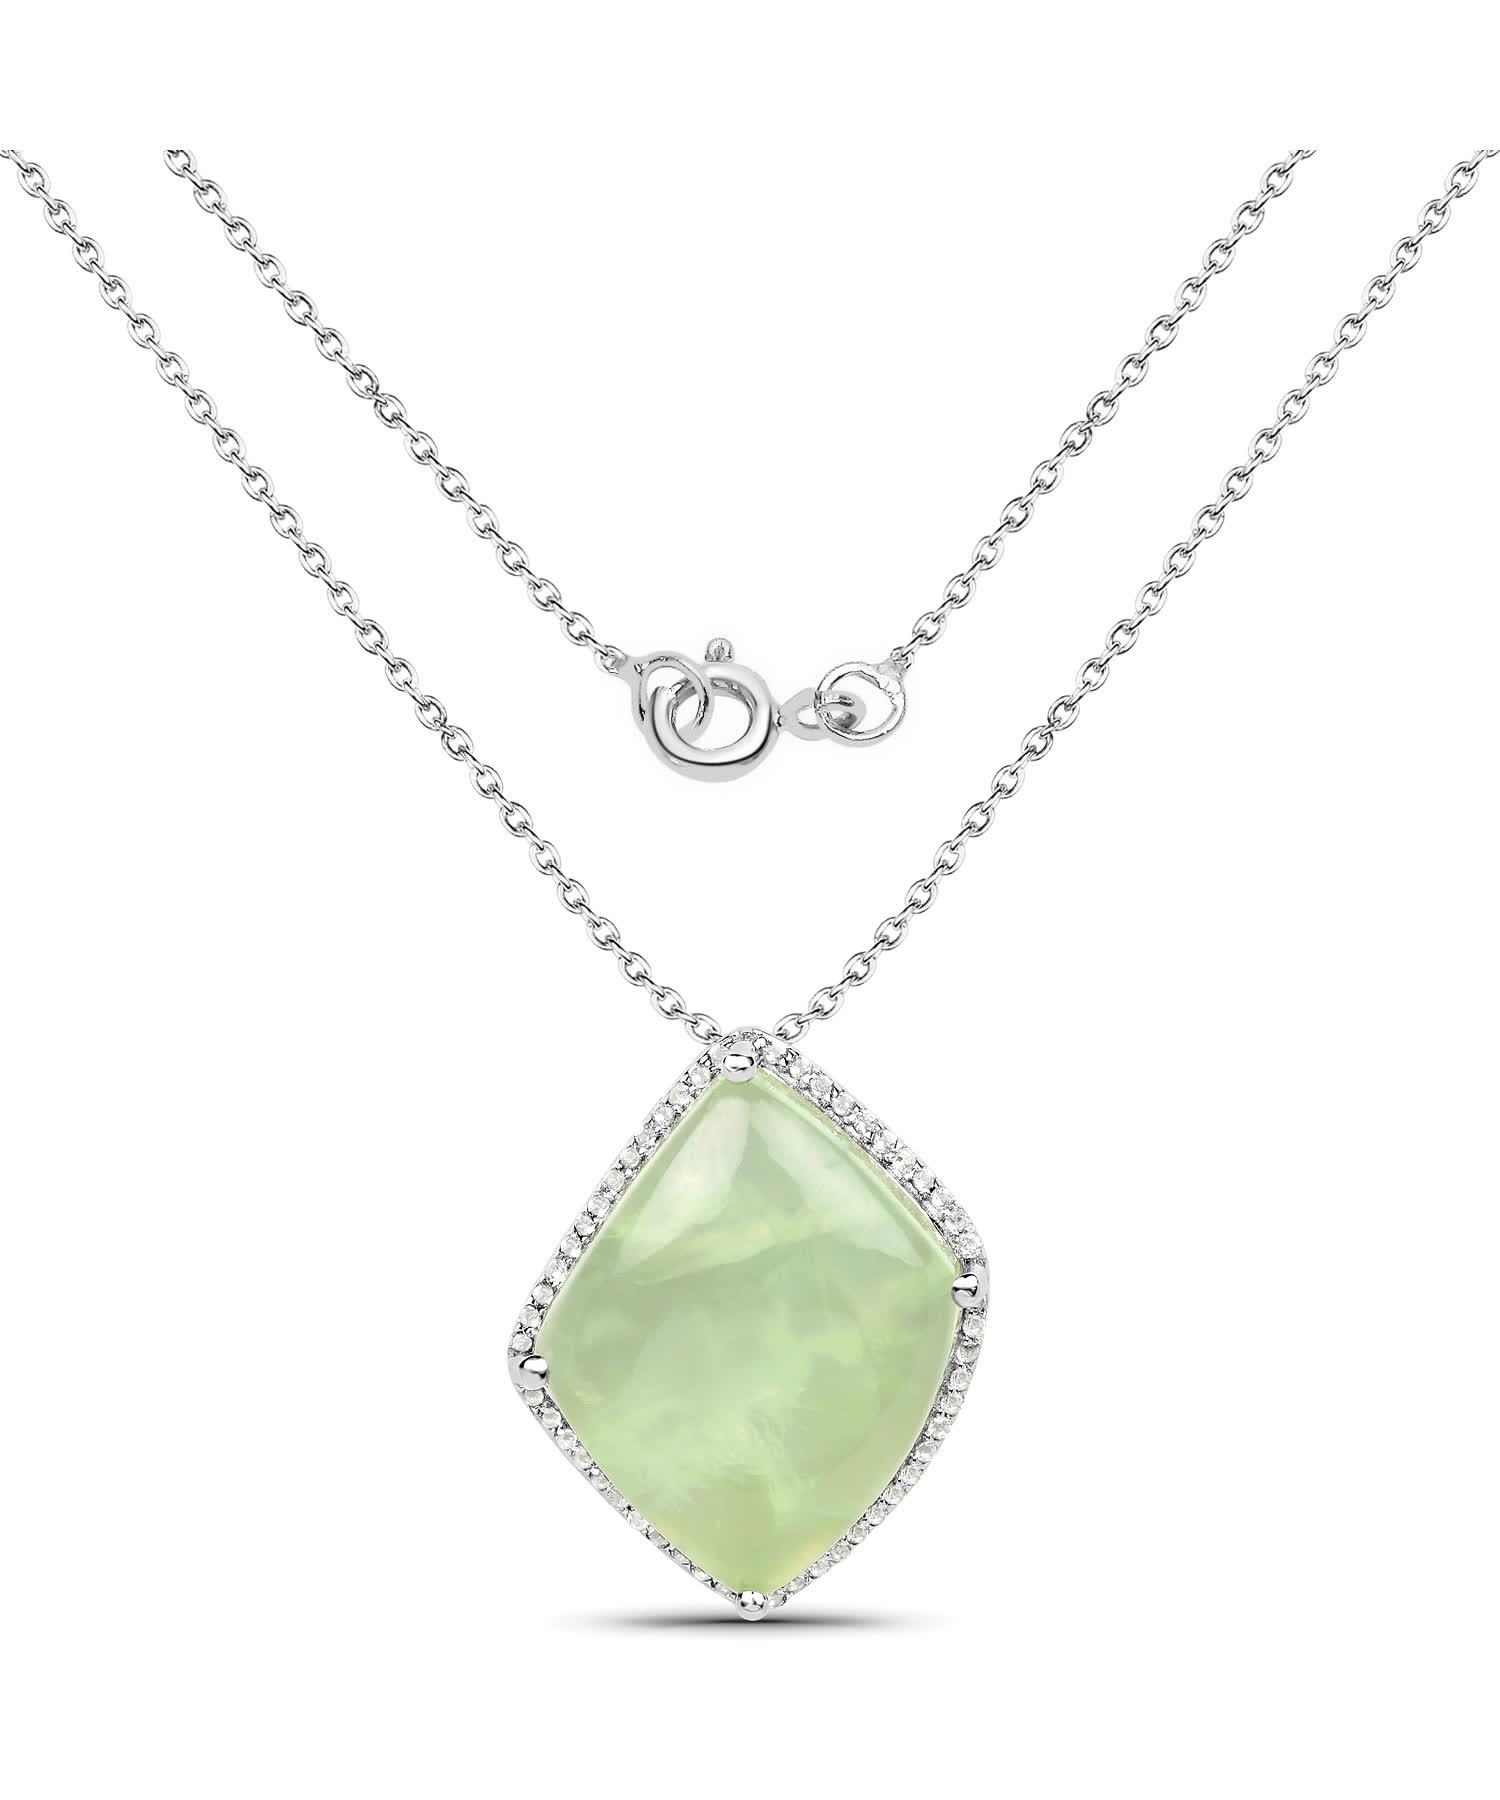 11.30ctw Natural Prehnite and Topaz Rhodium Plated 925 Sterling Silver Pendant With Chain View 2